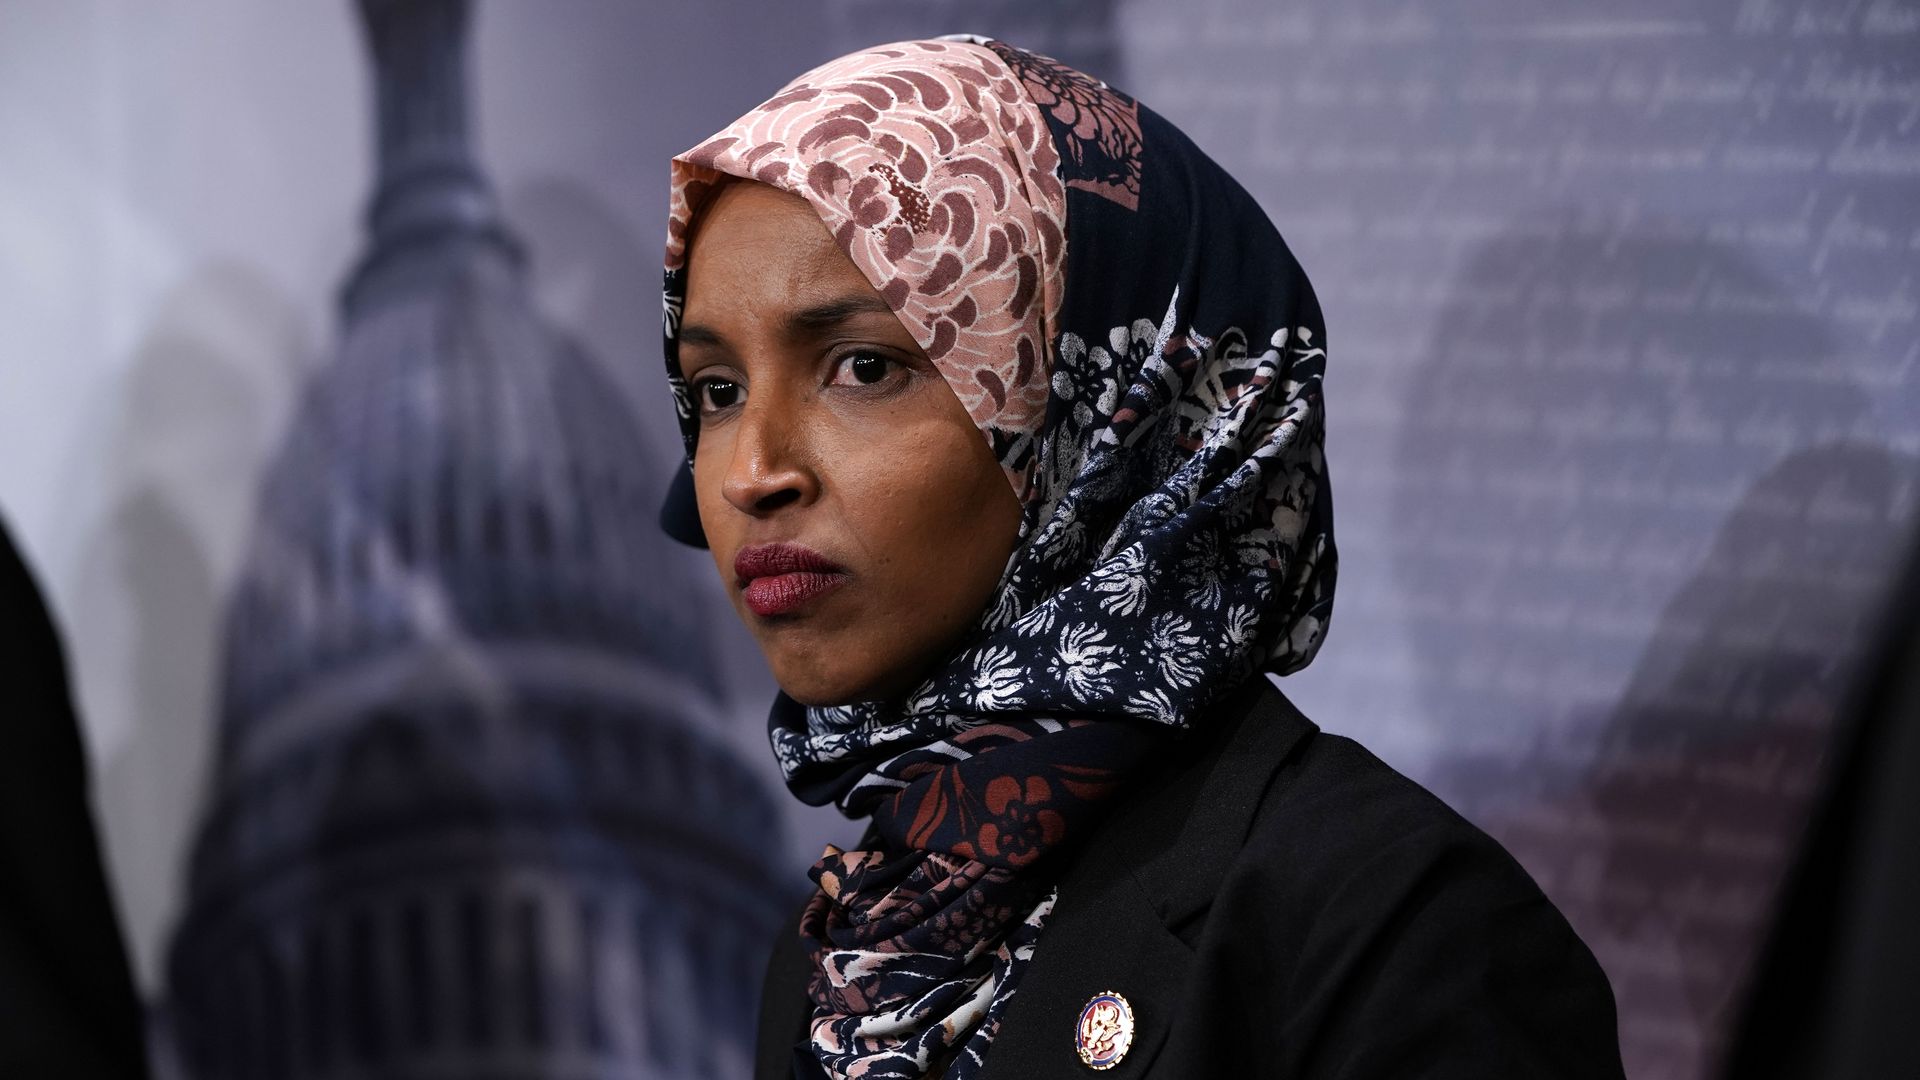 Ilhan Omar spoke of double standards during her "Late Show" appearance.